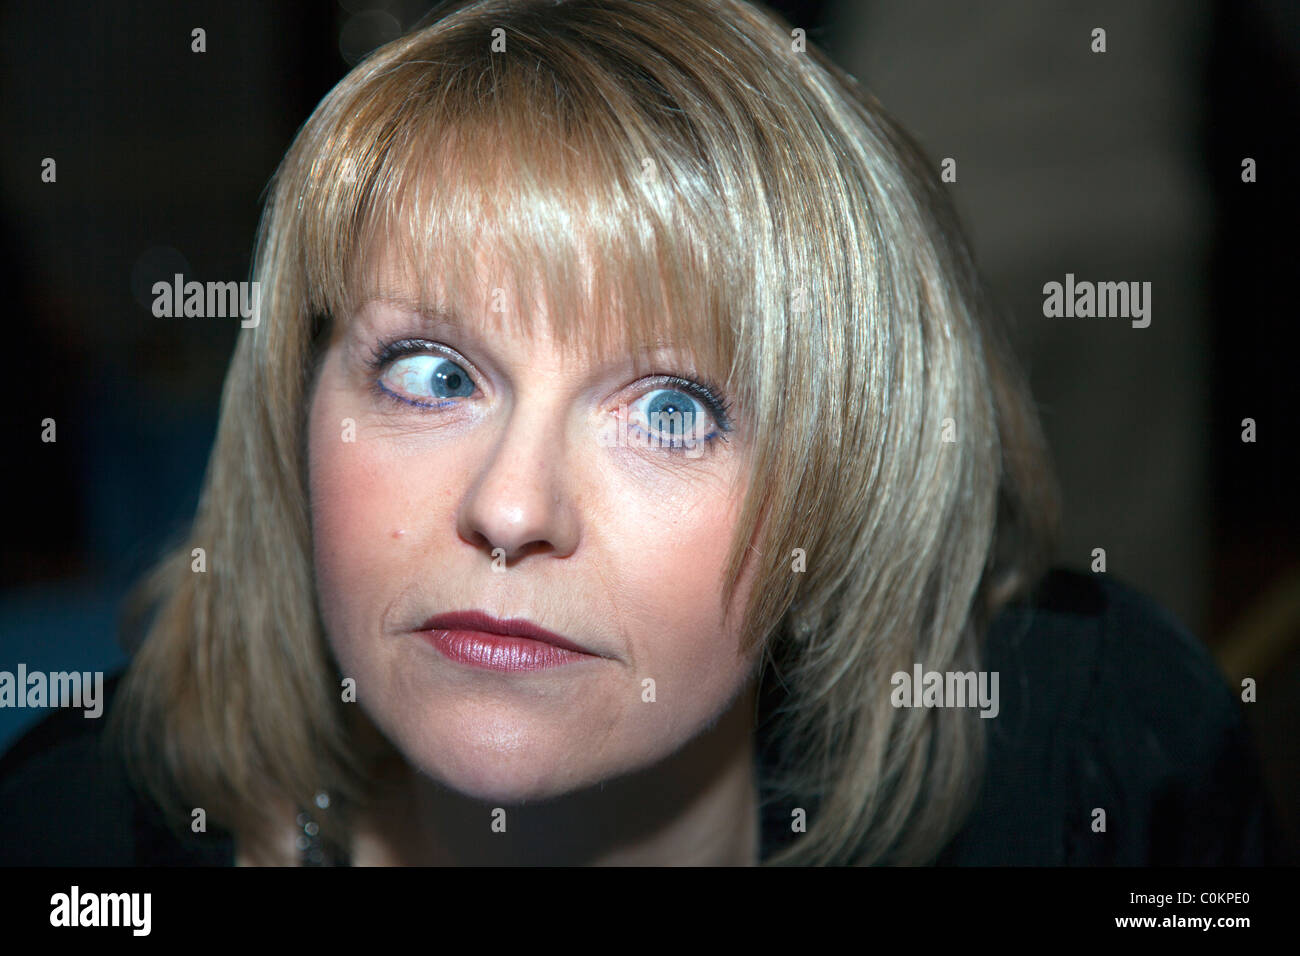 Boss Eyed High Resolution Stock Photography and Images - Alamy